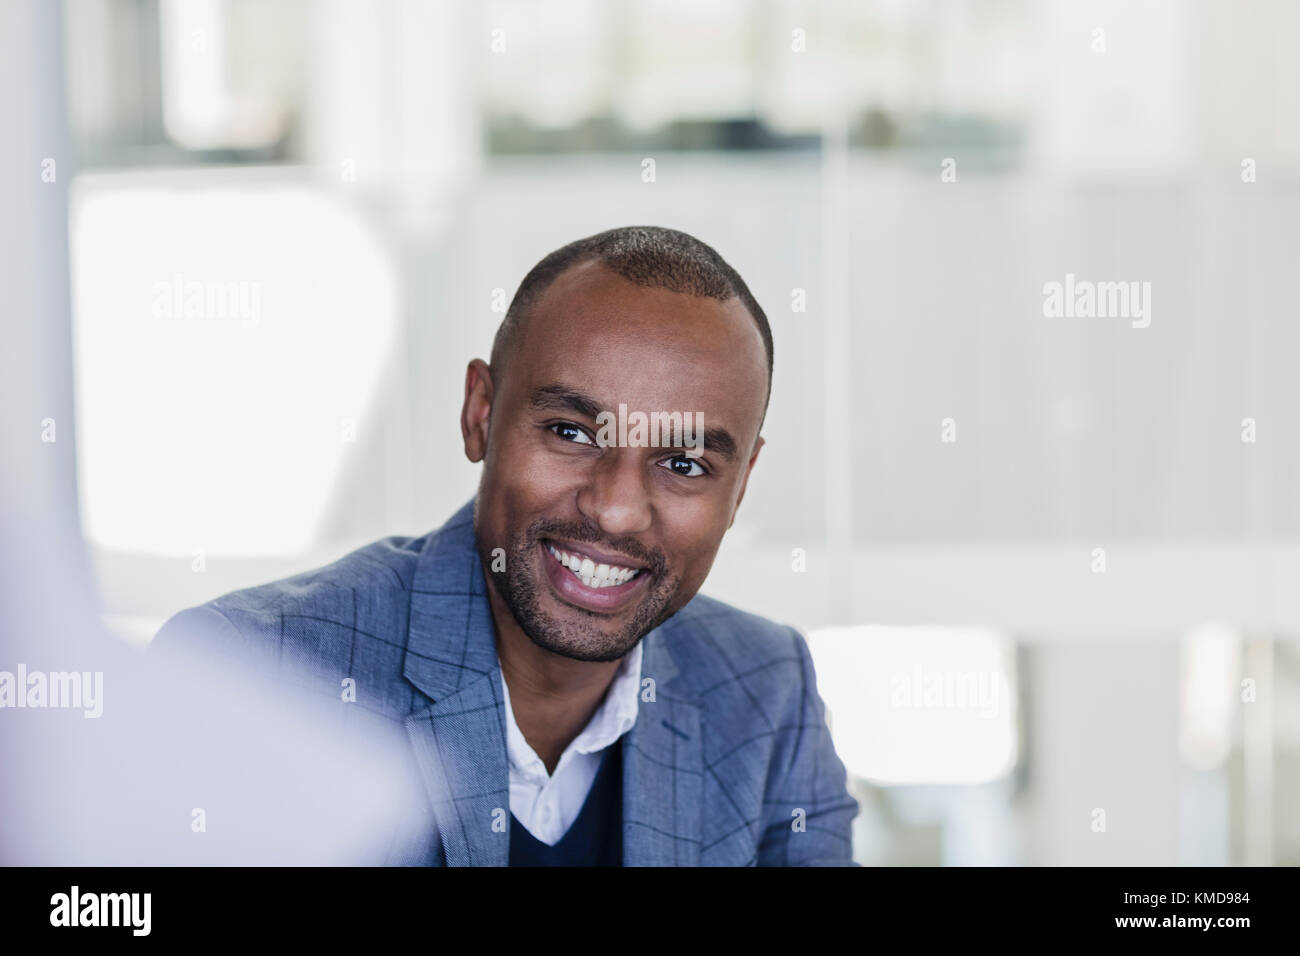 Smiling,enthusiastic businessman listening in meeting Stock Photo